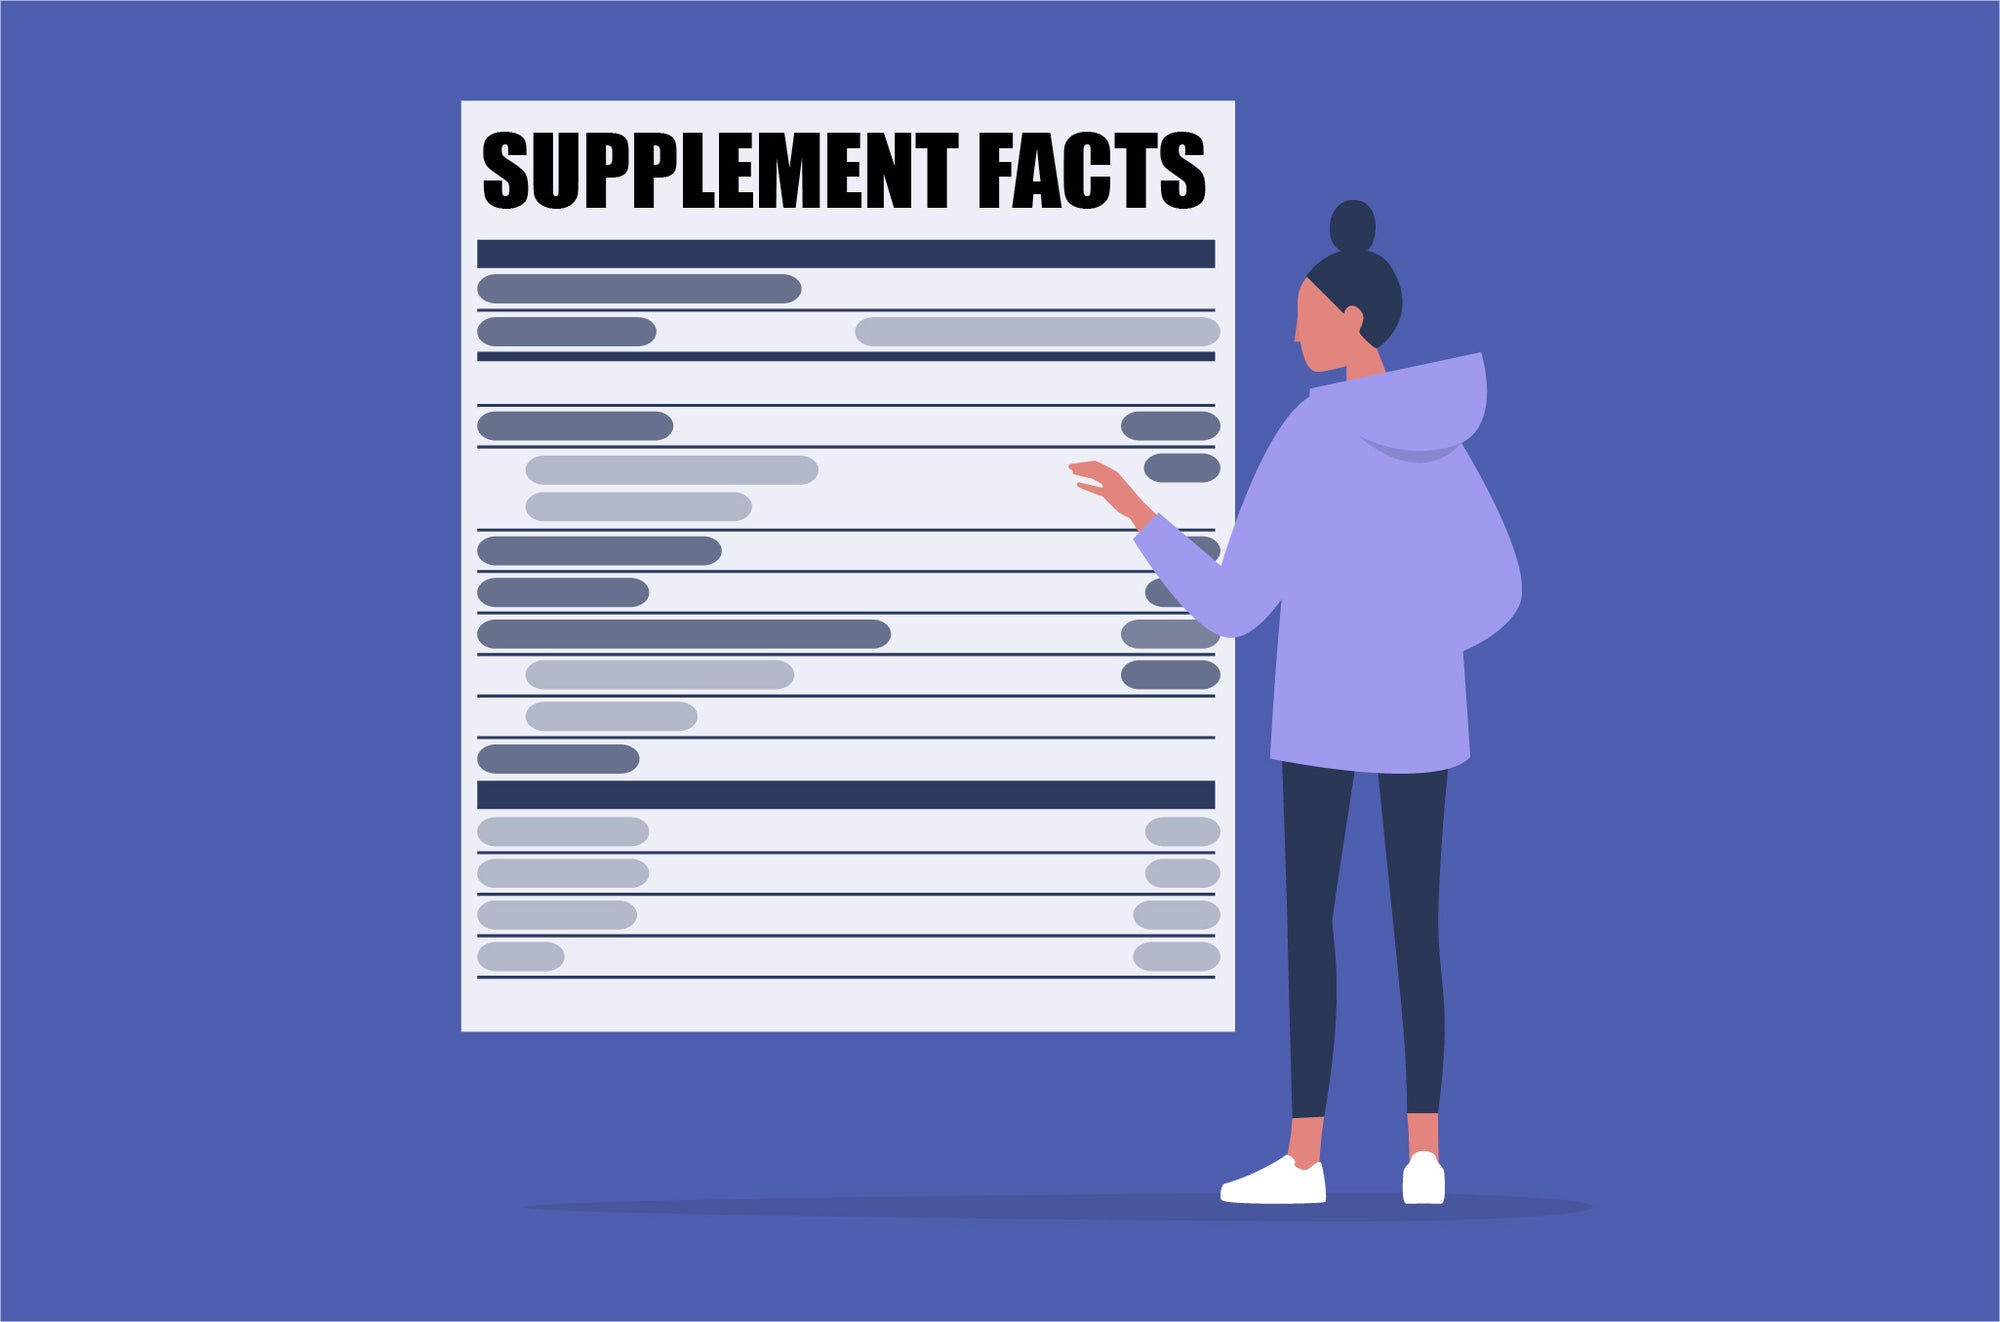 How to Read Herbal Supplement Fact Tables Like a Pro!